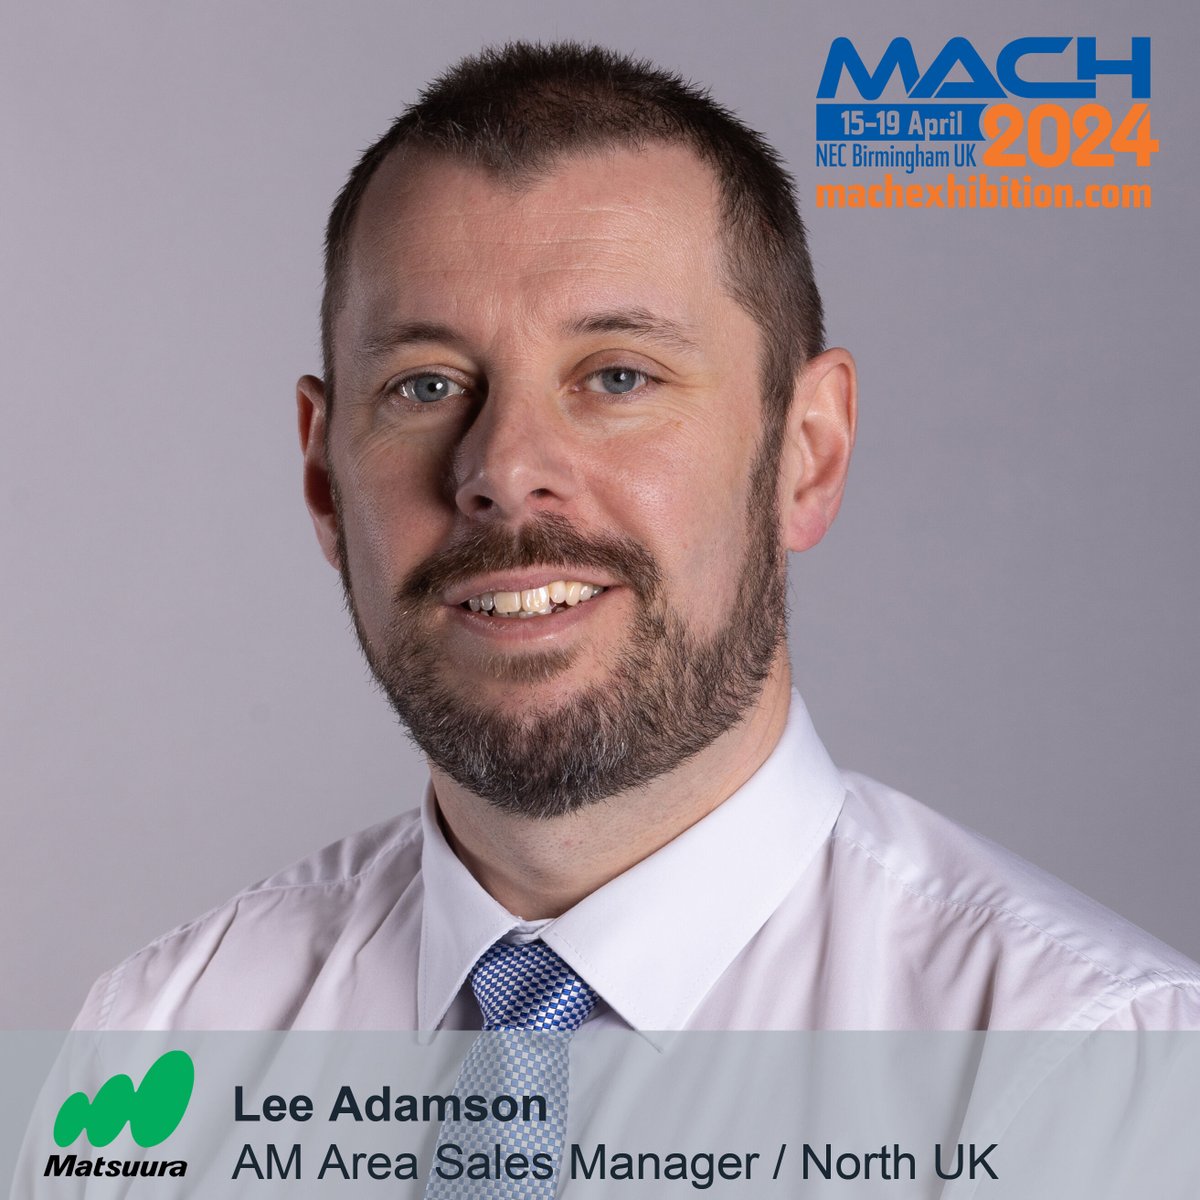 Visiting #MACH2024 looking for your next 3D Printer investment? Make your own personal appointment at the show on stand 20-542 with Lee Adamson, our Area Manager for additive manufacturing in the North UK. Email marketing@matsuura.co.uk to book your slot. #ukmfg